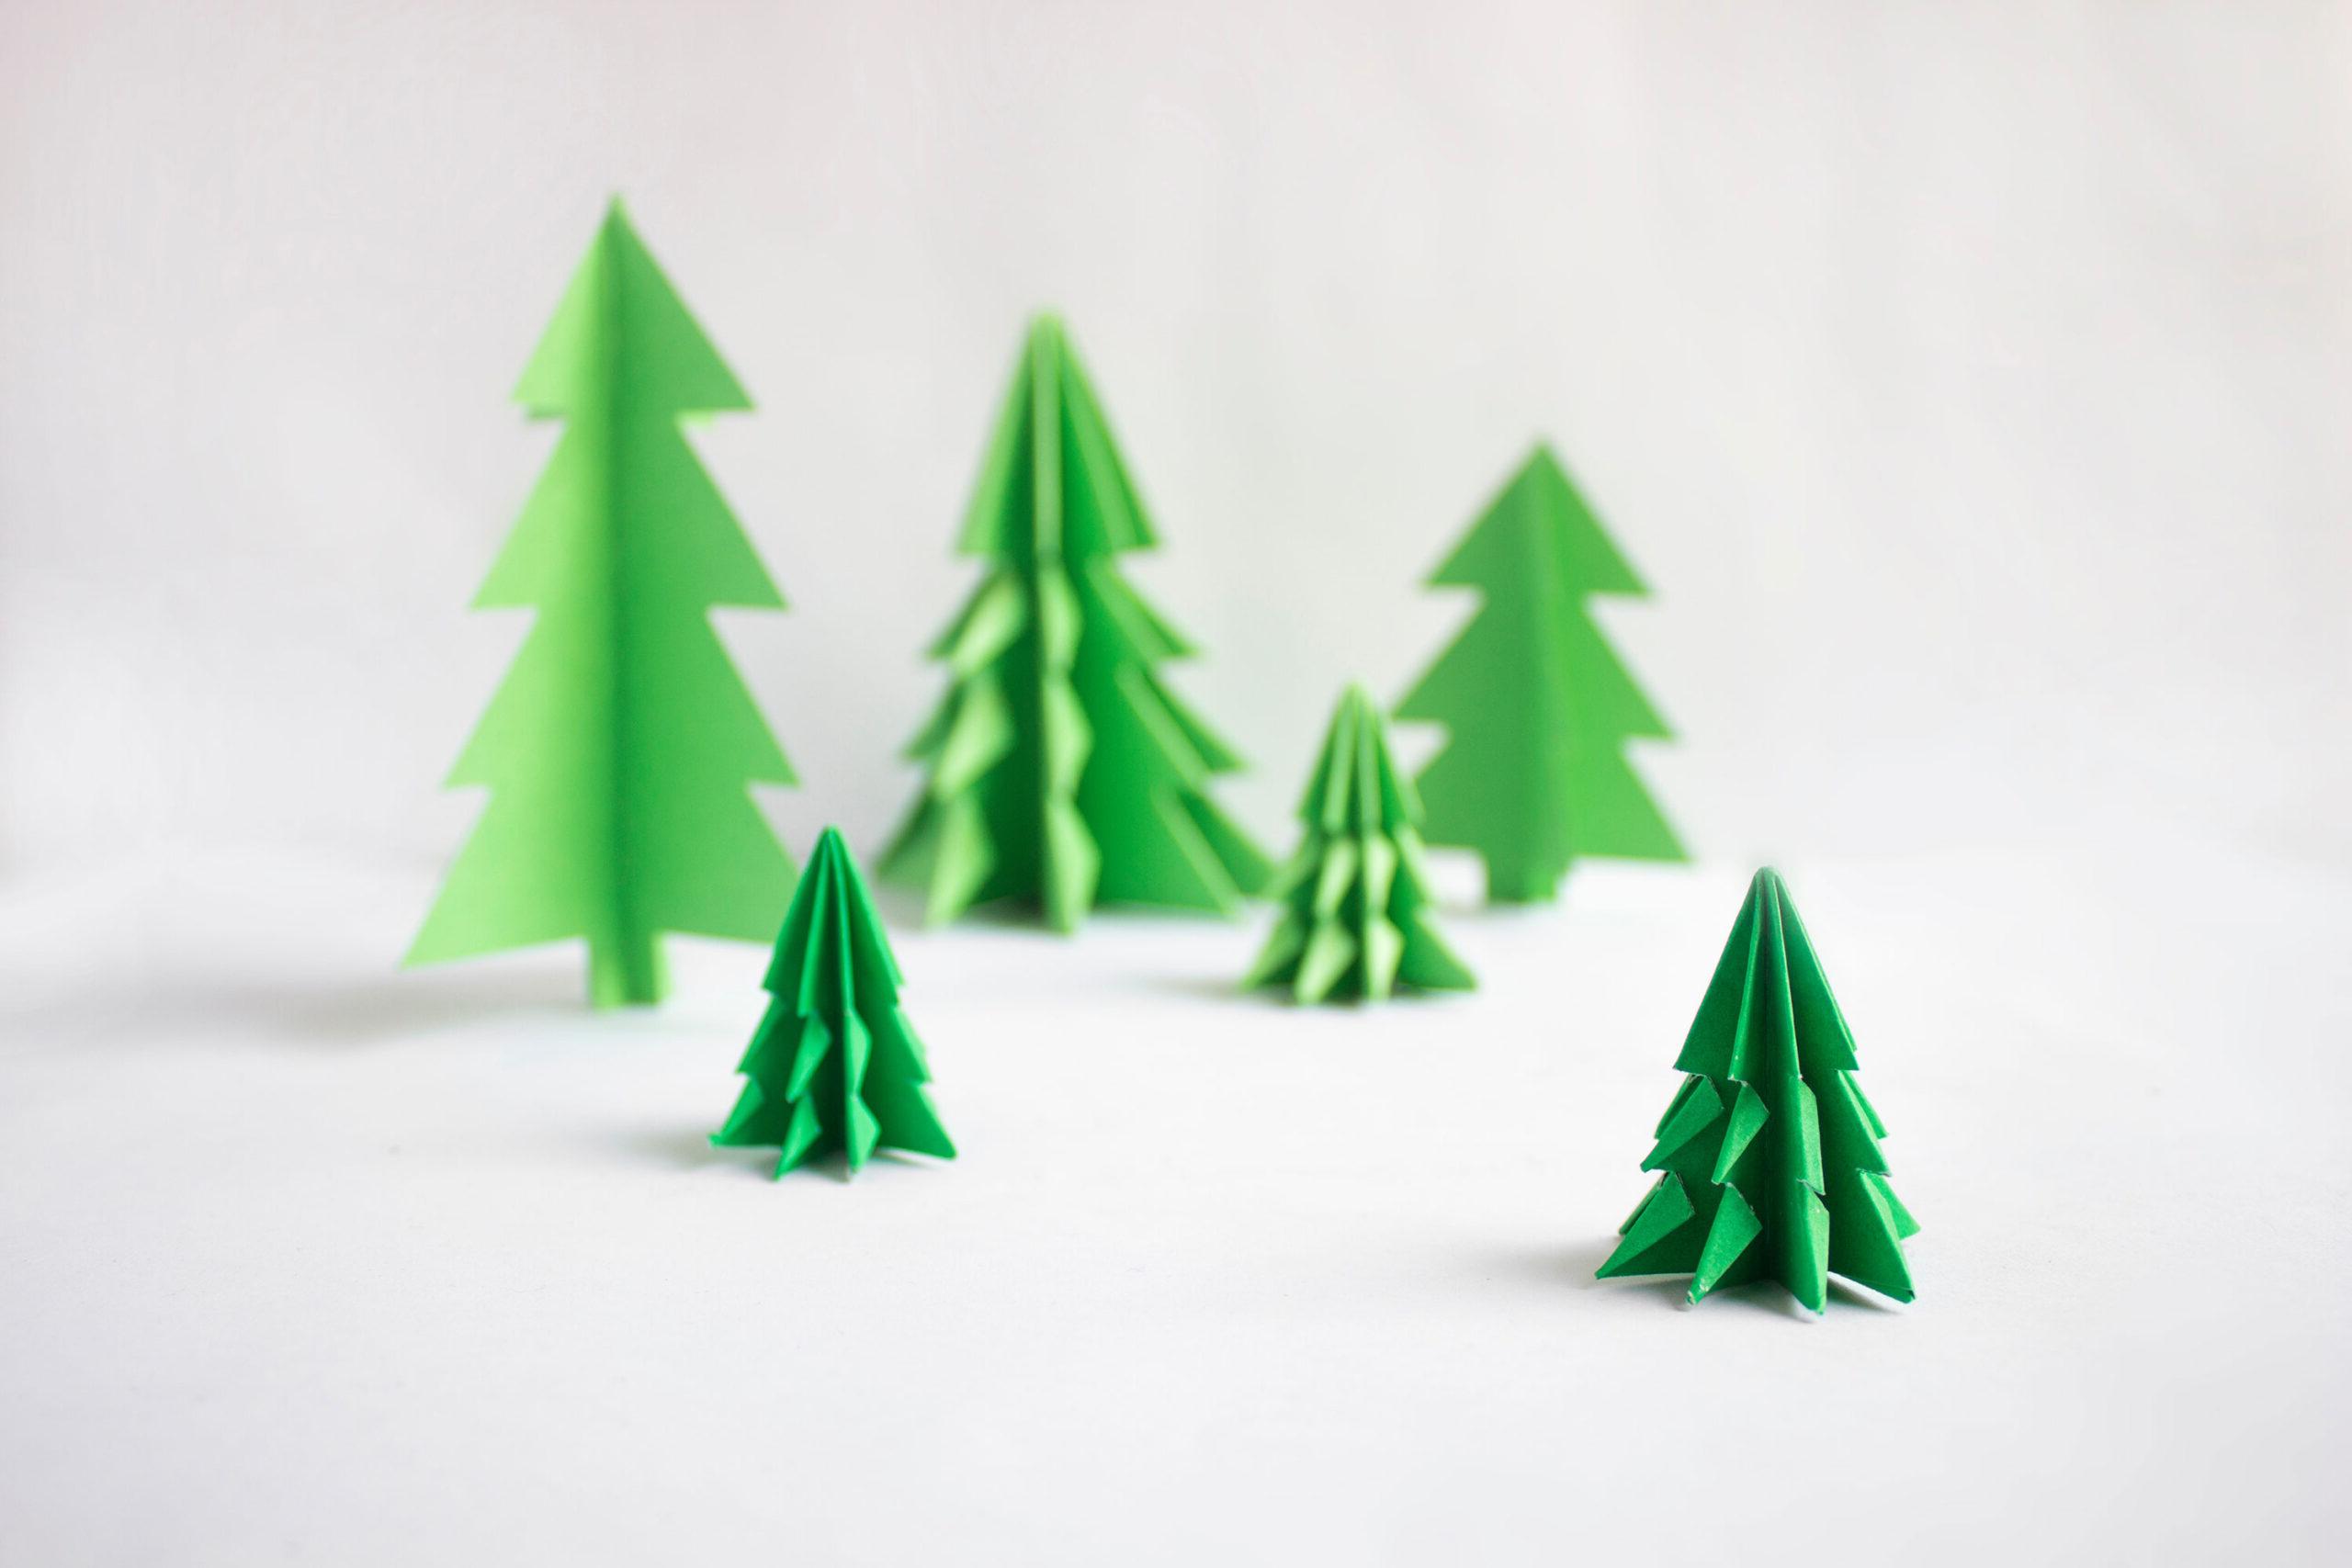 6 green paper pine trees on a light gray background